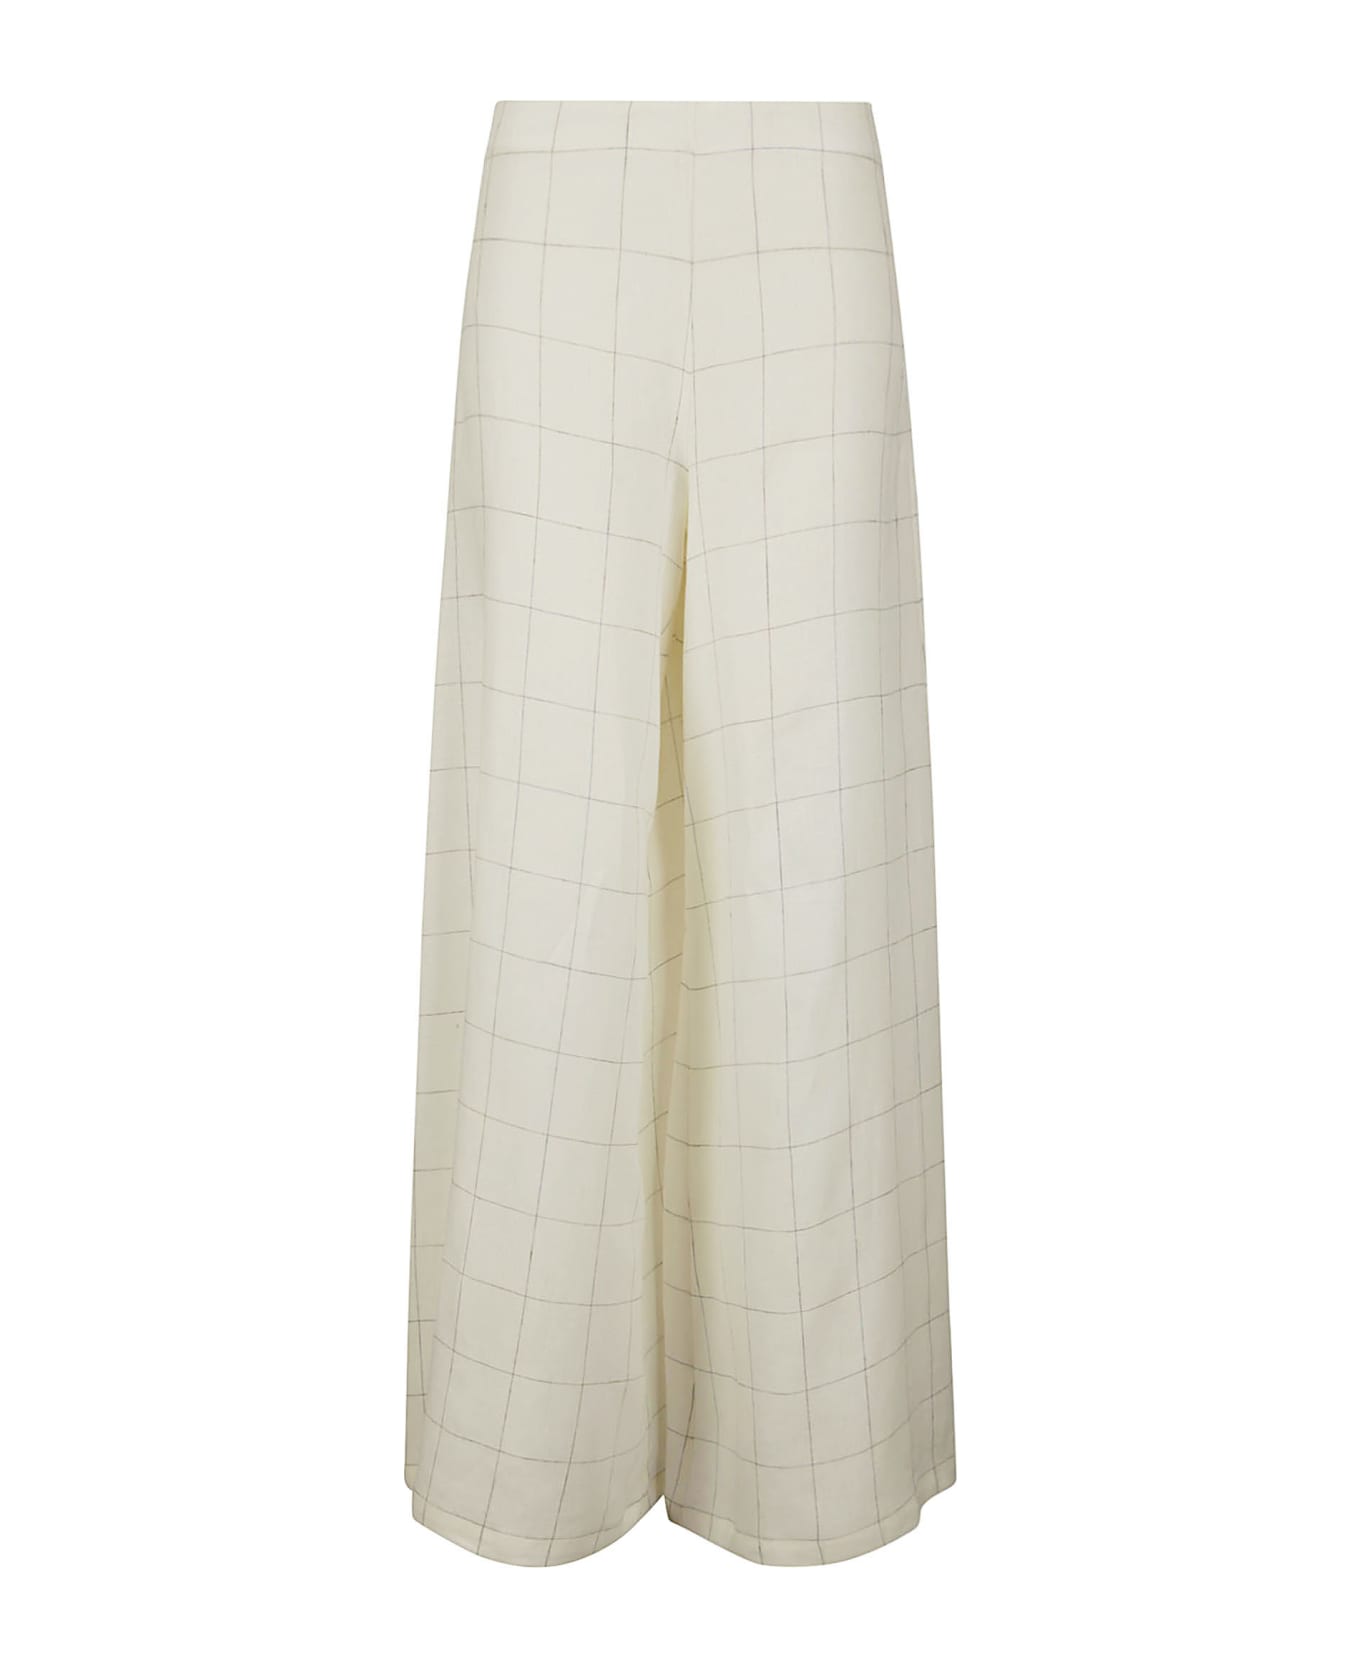 Stefano Mortari Wide Windowed Linen Trousers - CREAM WITH BLACK LINES ボトムス